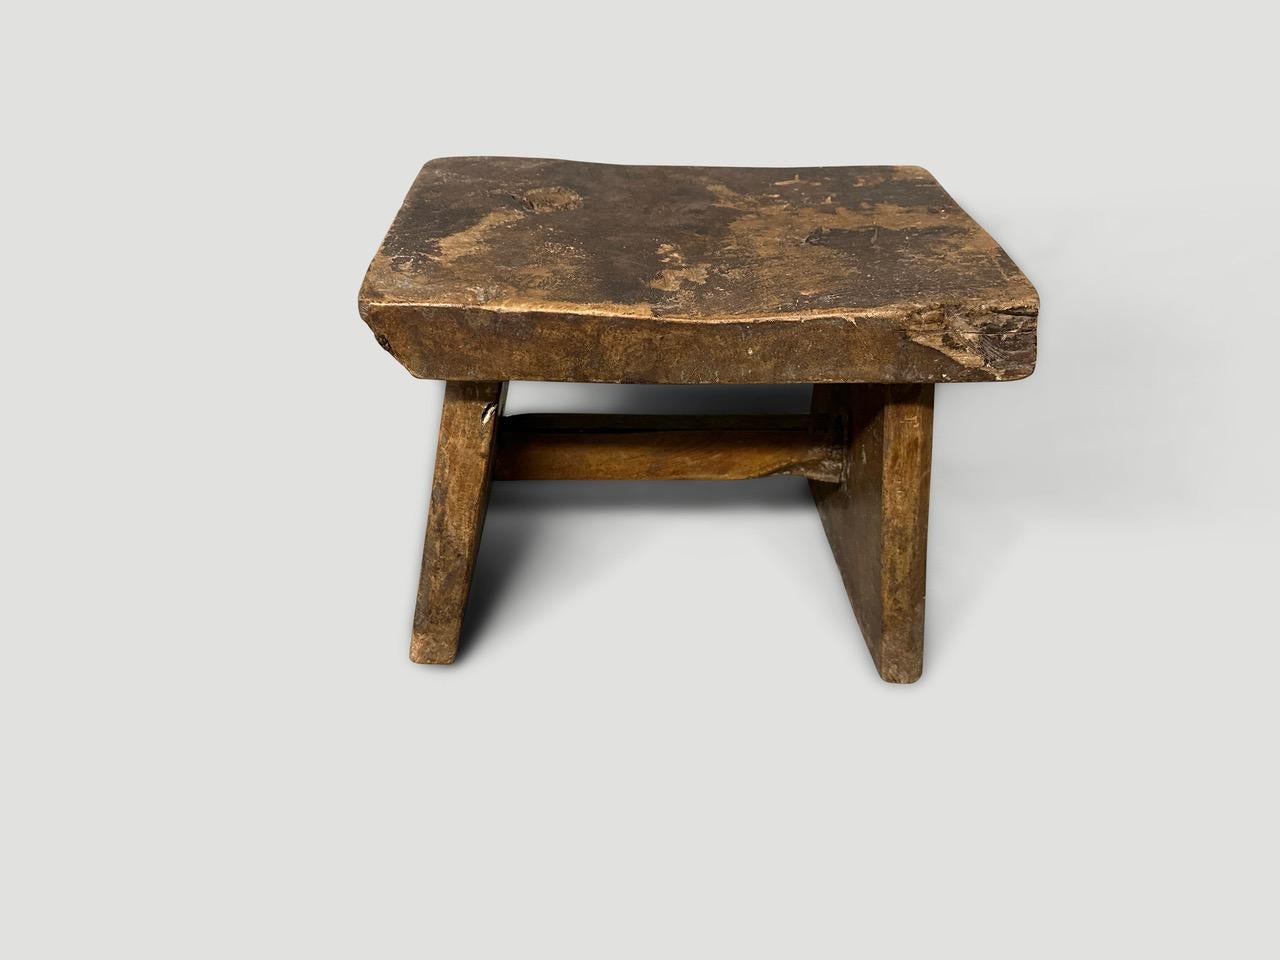 Antique hand made side table or stool. Celebrating the cracks and crevices and all the other marks that time and loving use have left behind. Circa 1950

This side table or stool was hand made in the spirit of Wabi-Sabi, a Japanese philosophy that